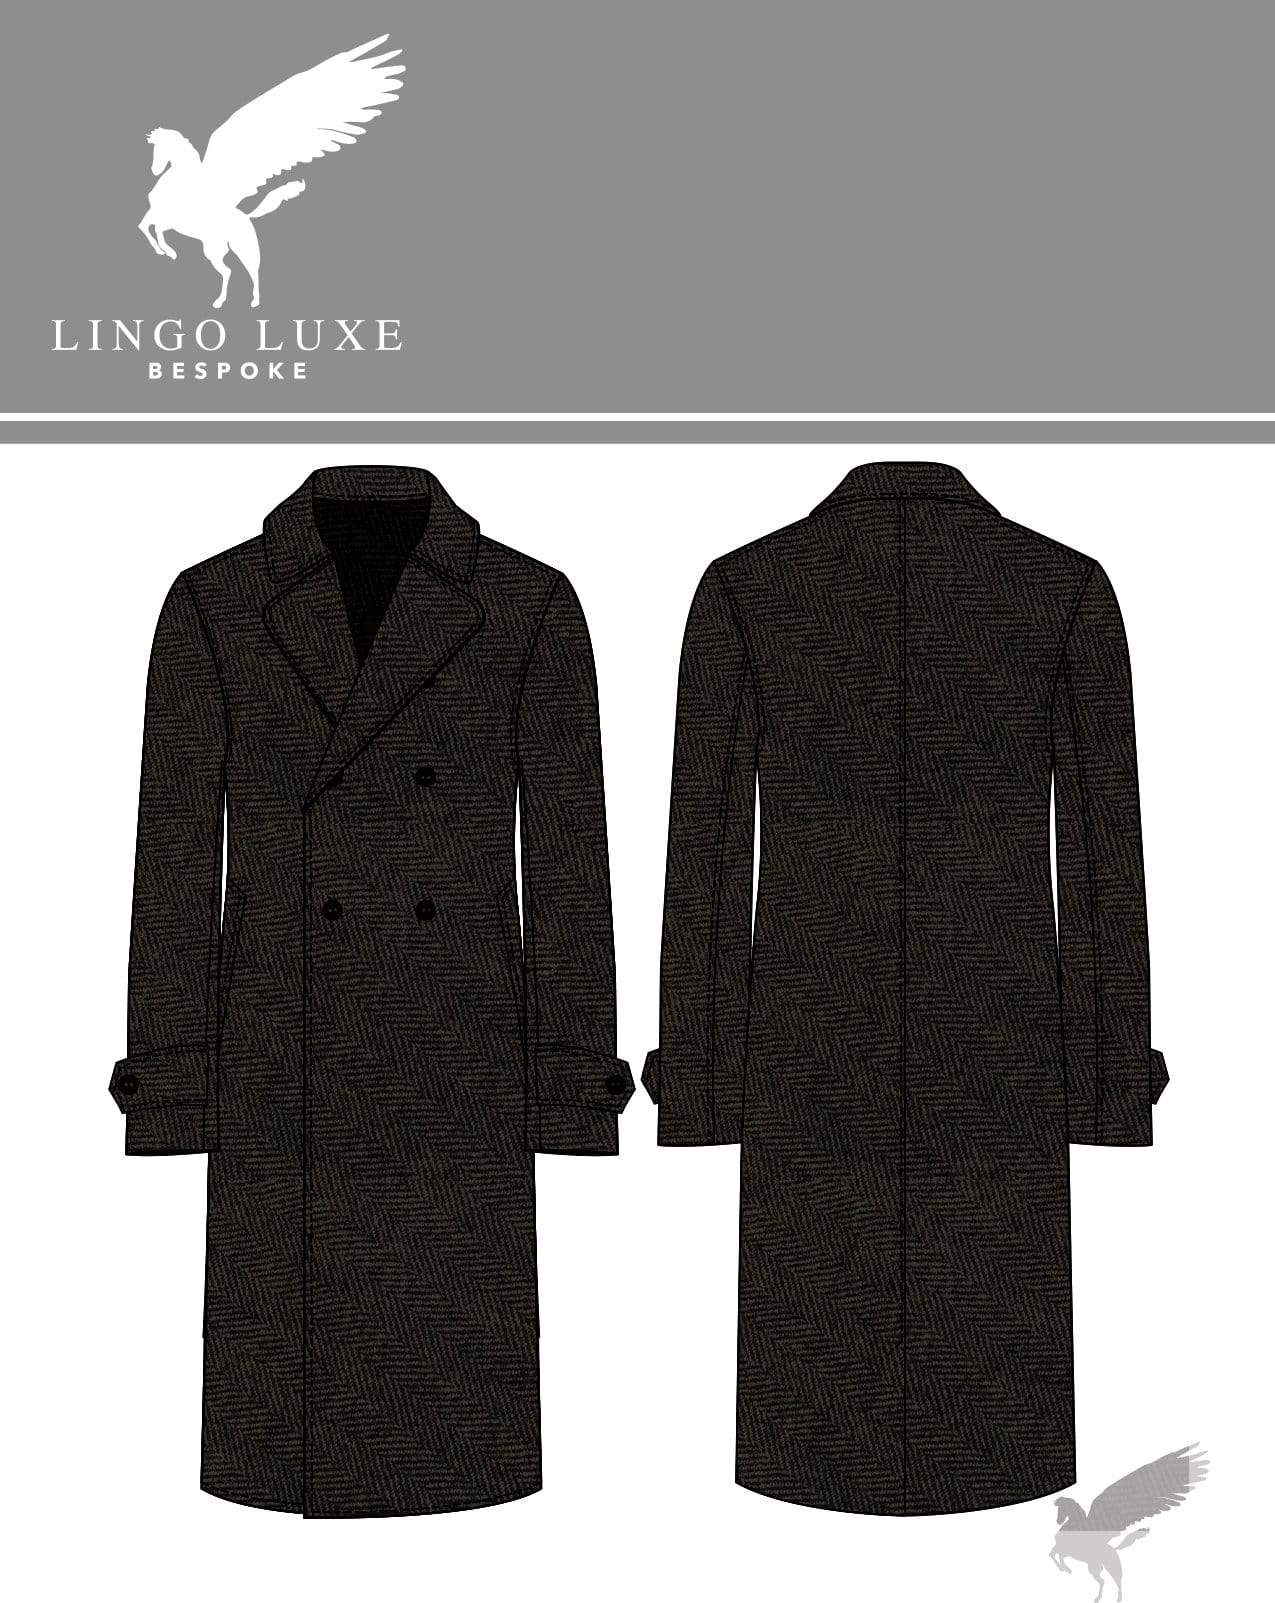 Outerwear | Lingo Luxe The Stately Overcoat | Soot Herring-Lingo Luxe Bespoke